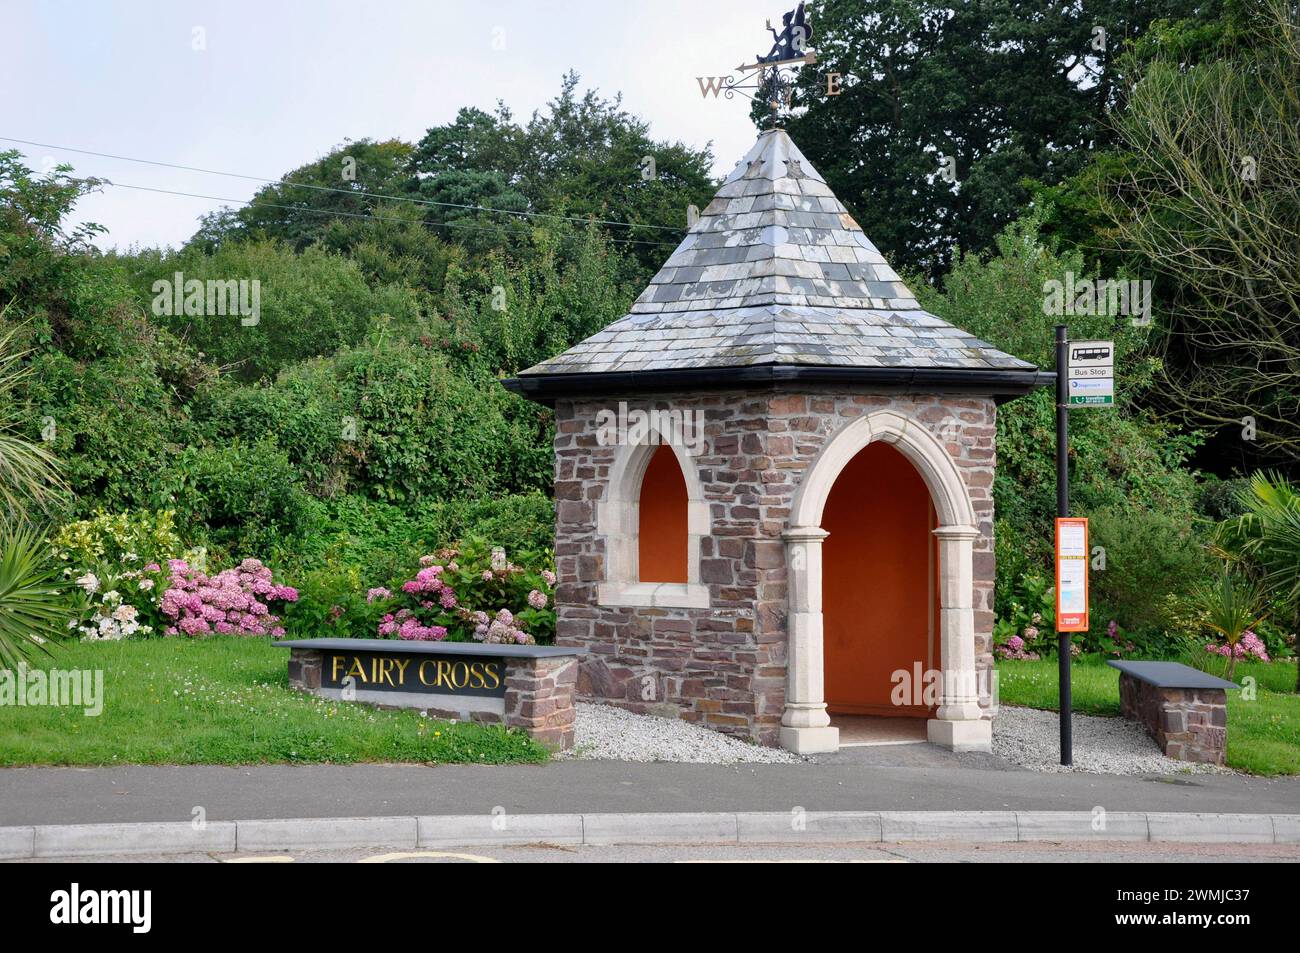 The enchanting bus shelter at Fairy Cross beside the A39 trunk road in North Devon. Stock Photo